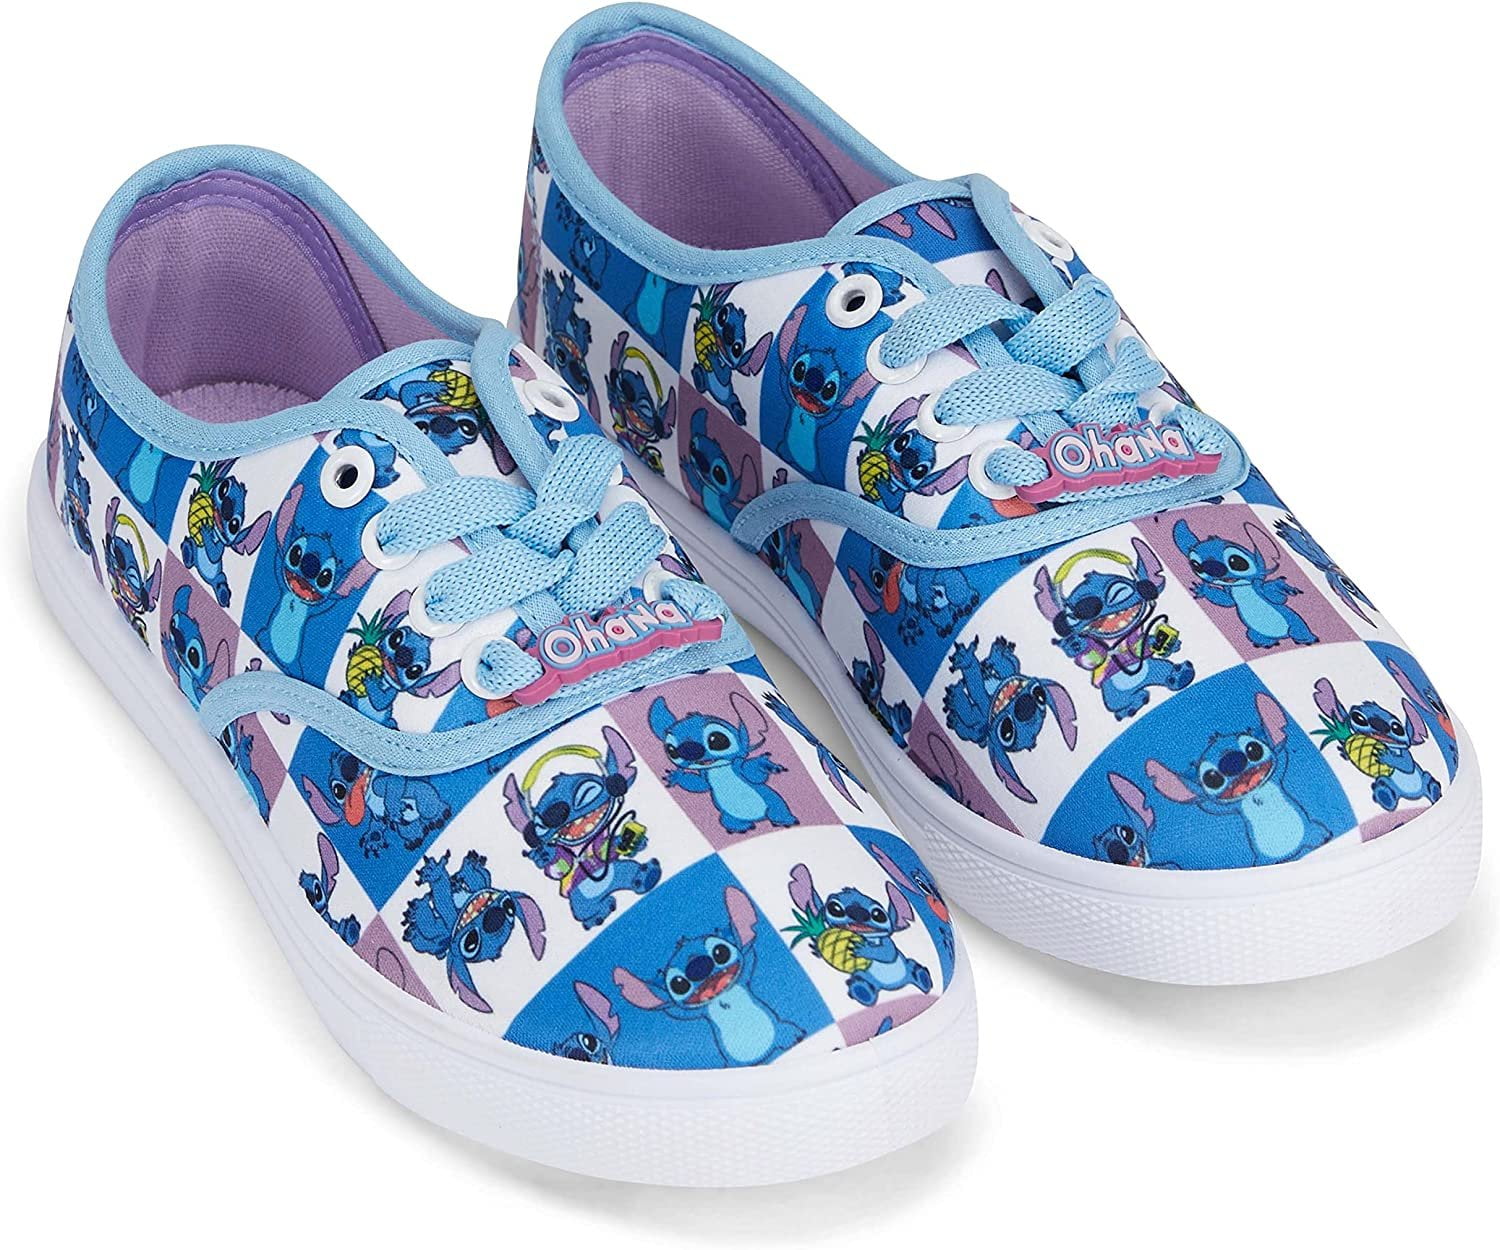 Stitch shoes, stitch merch, Lilo and stitch sneakers sold by ChaZhan, SKU  38717526